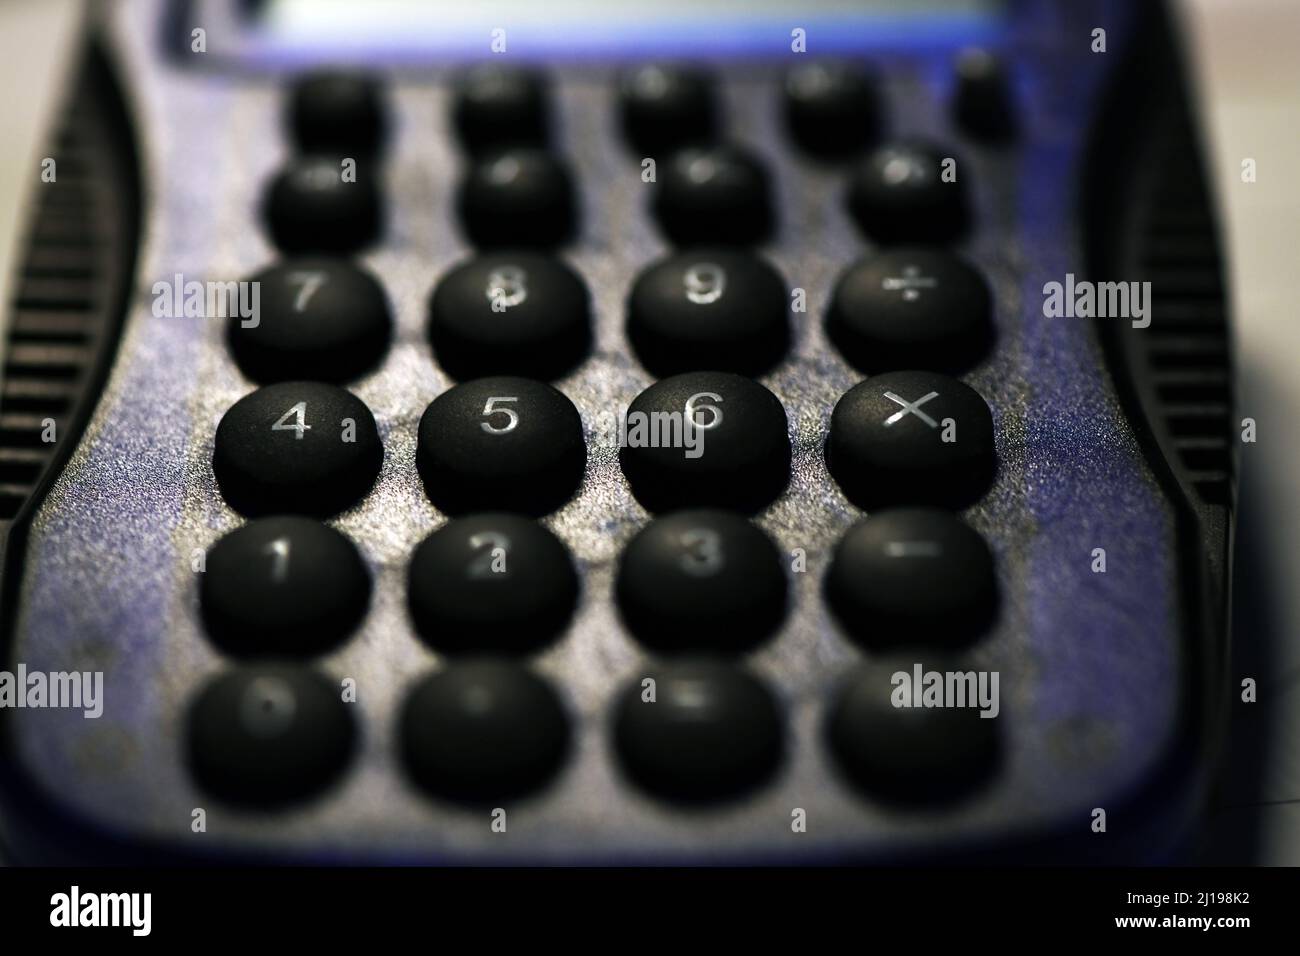 Electronic calculator for math, scientific equations and complex as well as simple projects. Stock Photo